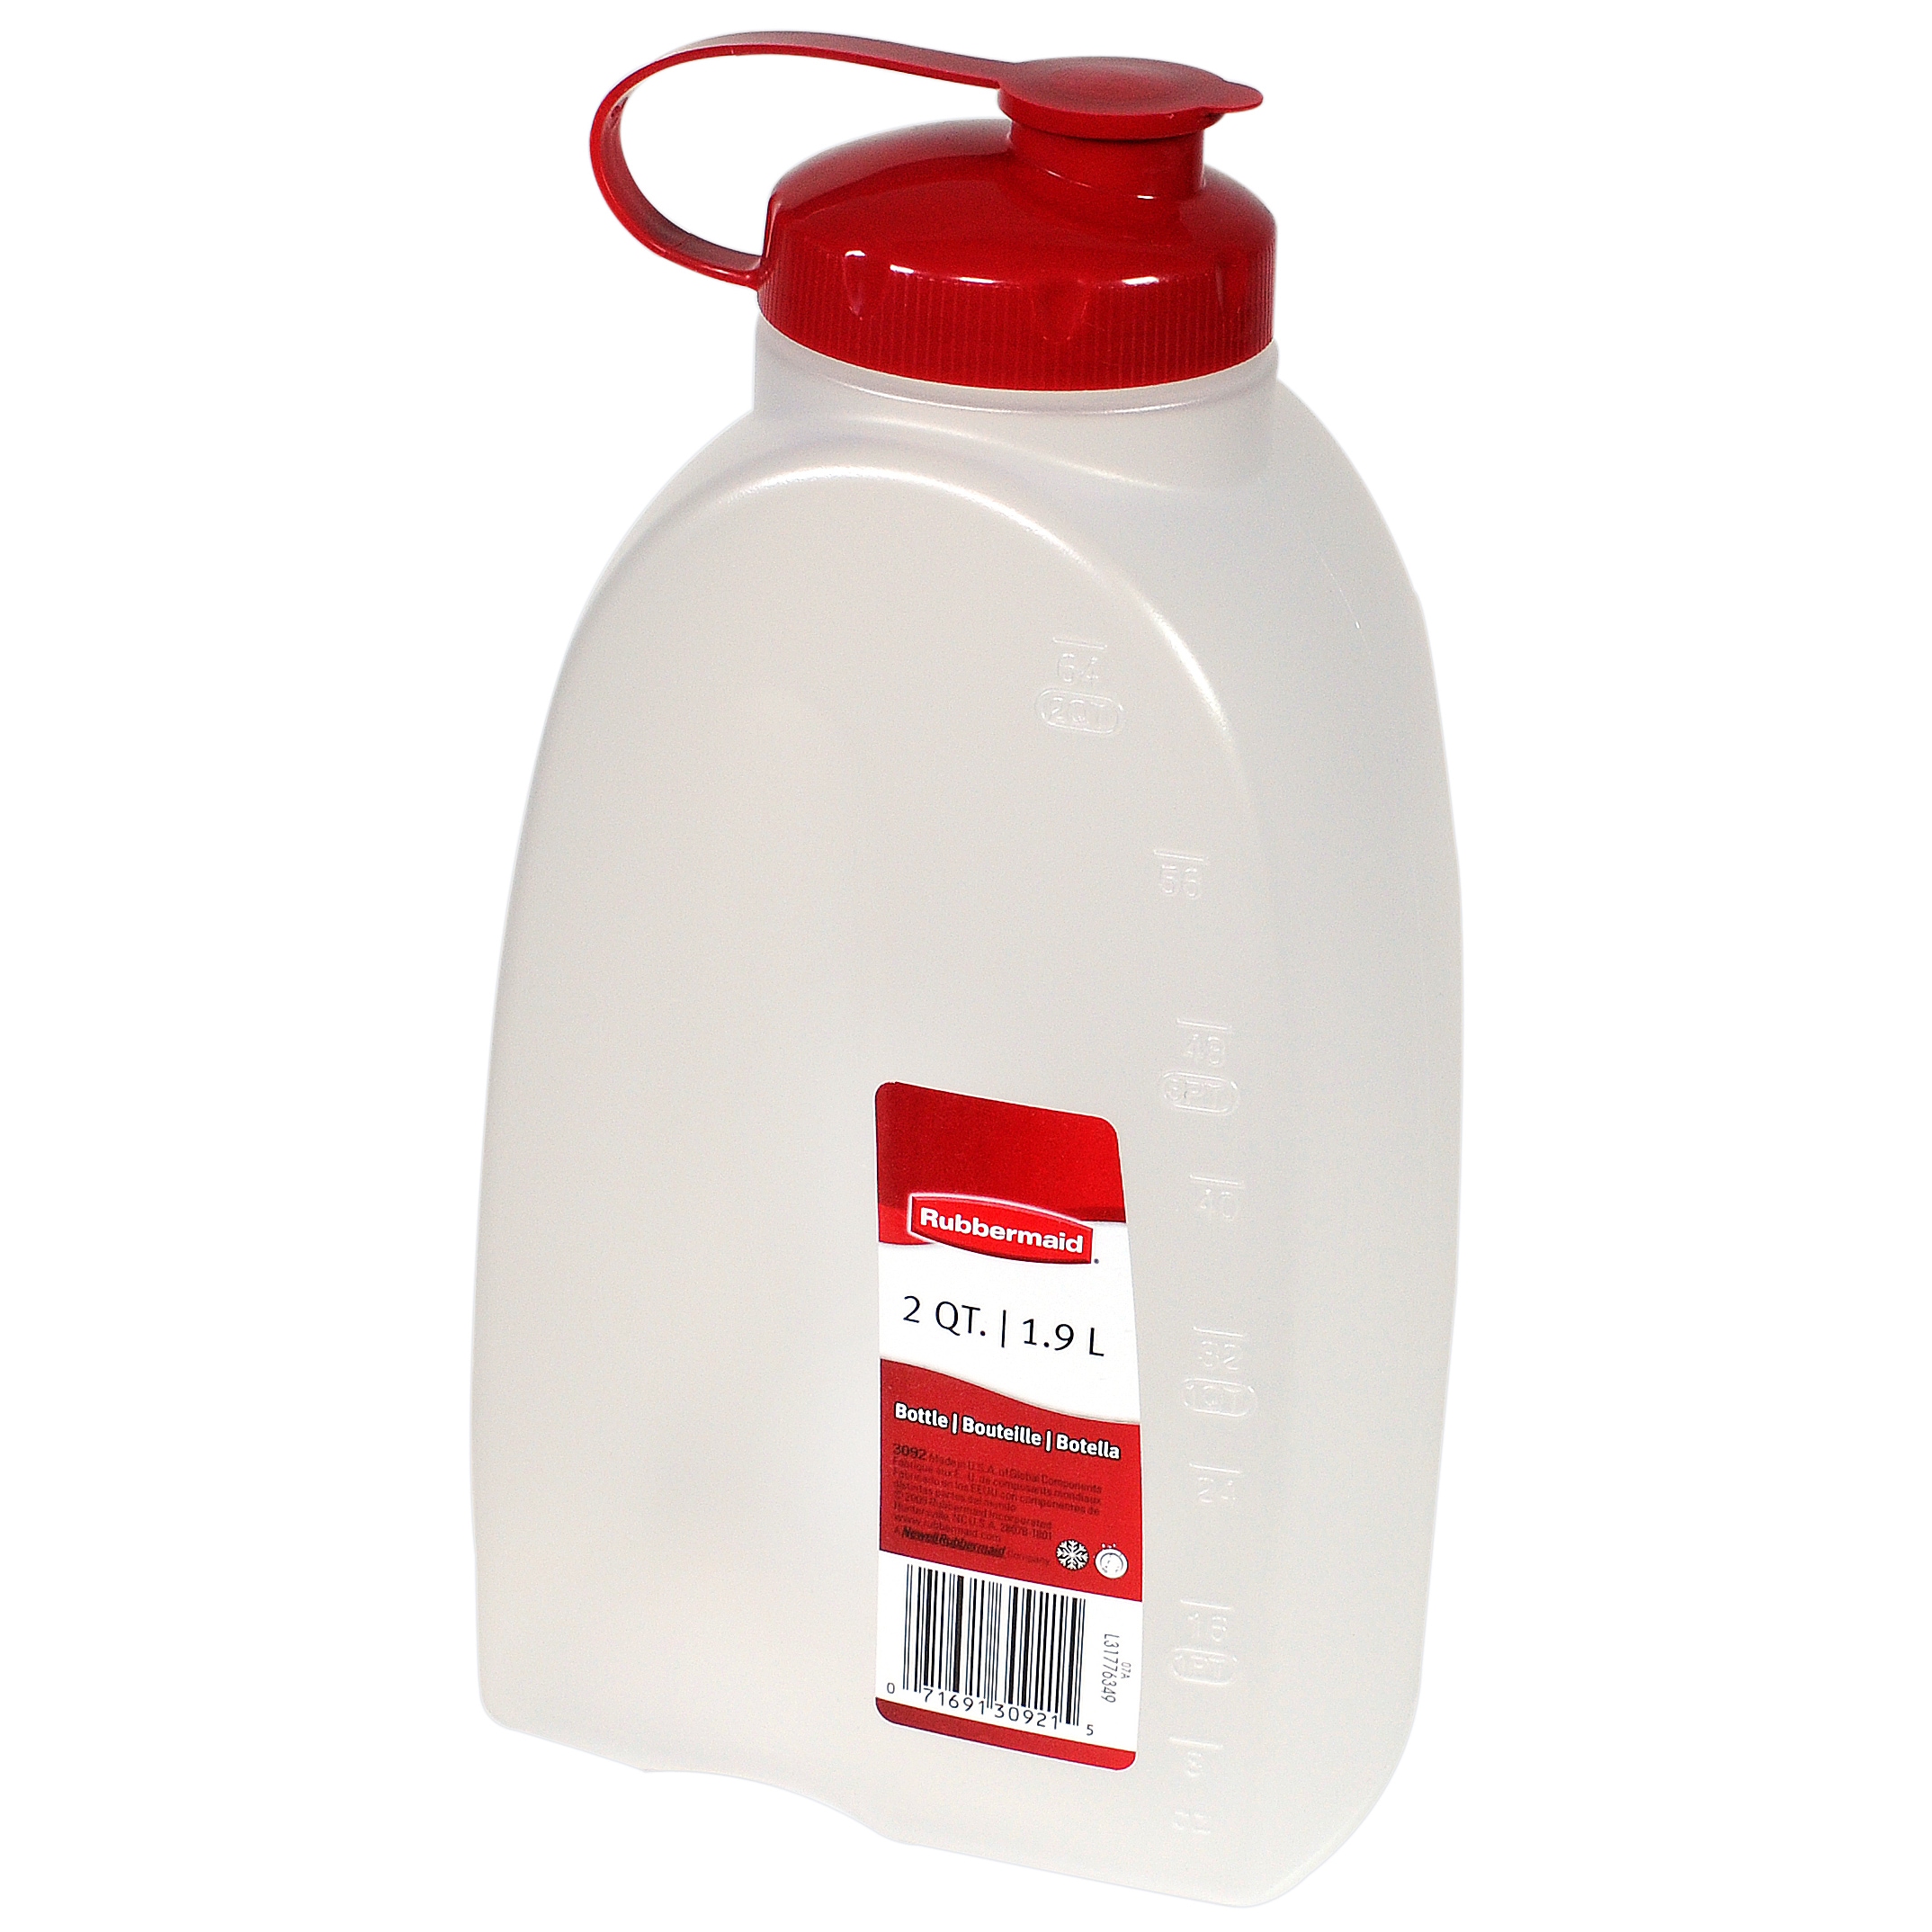 https://ak1.ostkcdn.com/images/products/14654737/Rubbermaid-1776349-2-Quart-Servin-Saver-Bottle-27c90b38-33de-493b-bd2a-6b2c364079d5.jpg